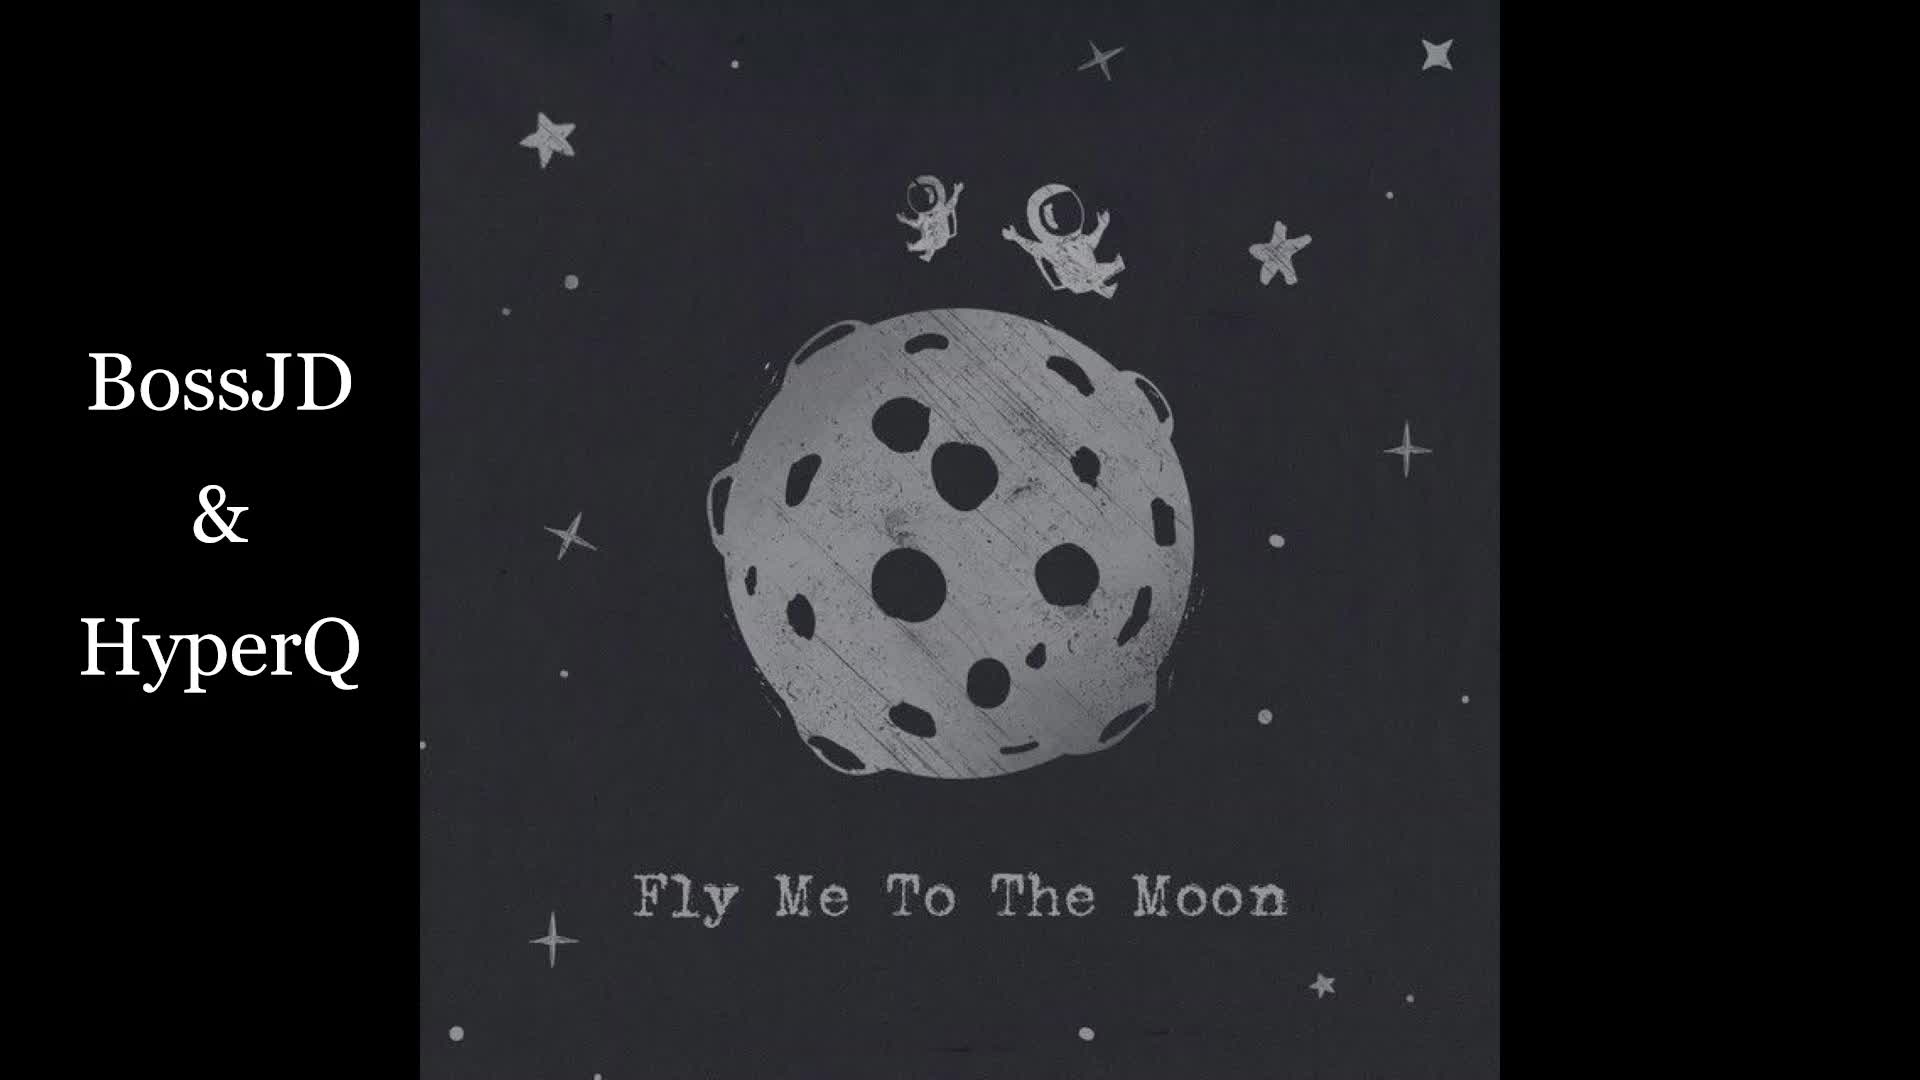 Fly the moon слушать. Fly to the Moon. Moonlight обложка. Fly me 2 the Moon игра. Fly me to the Moon.